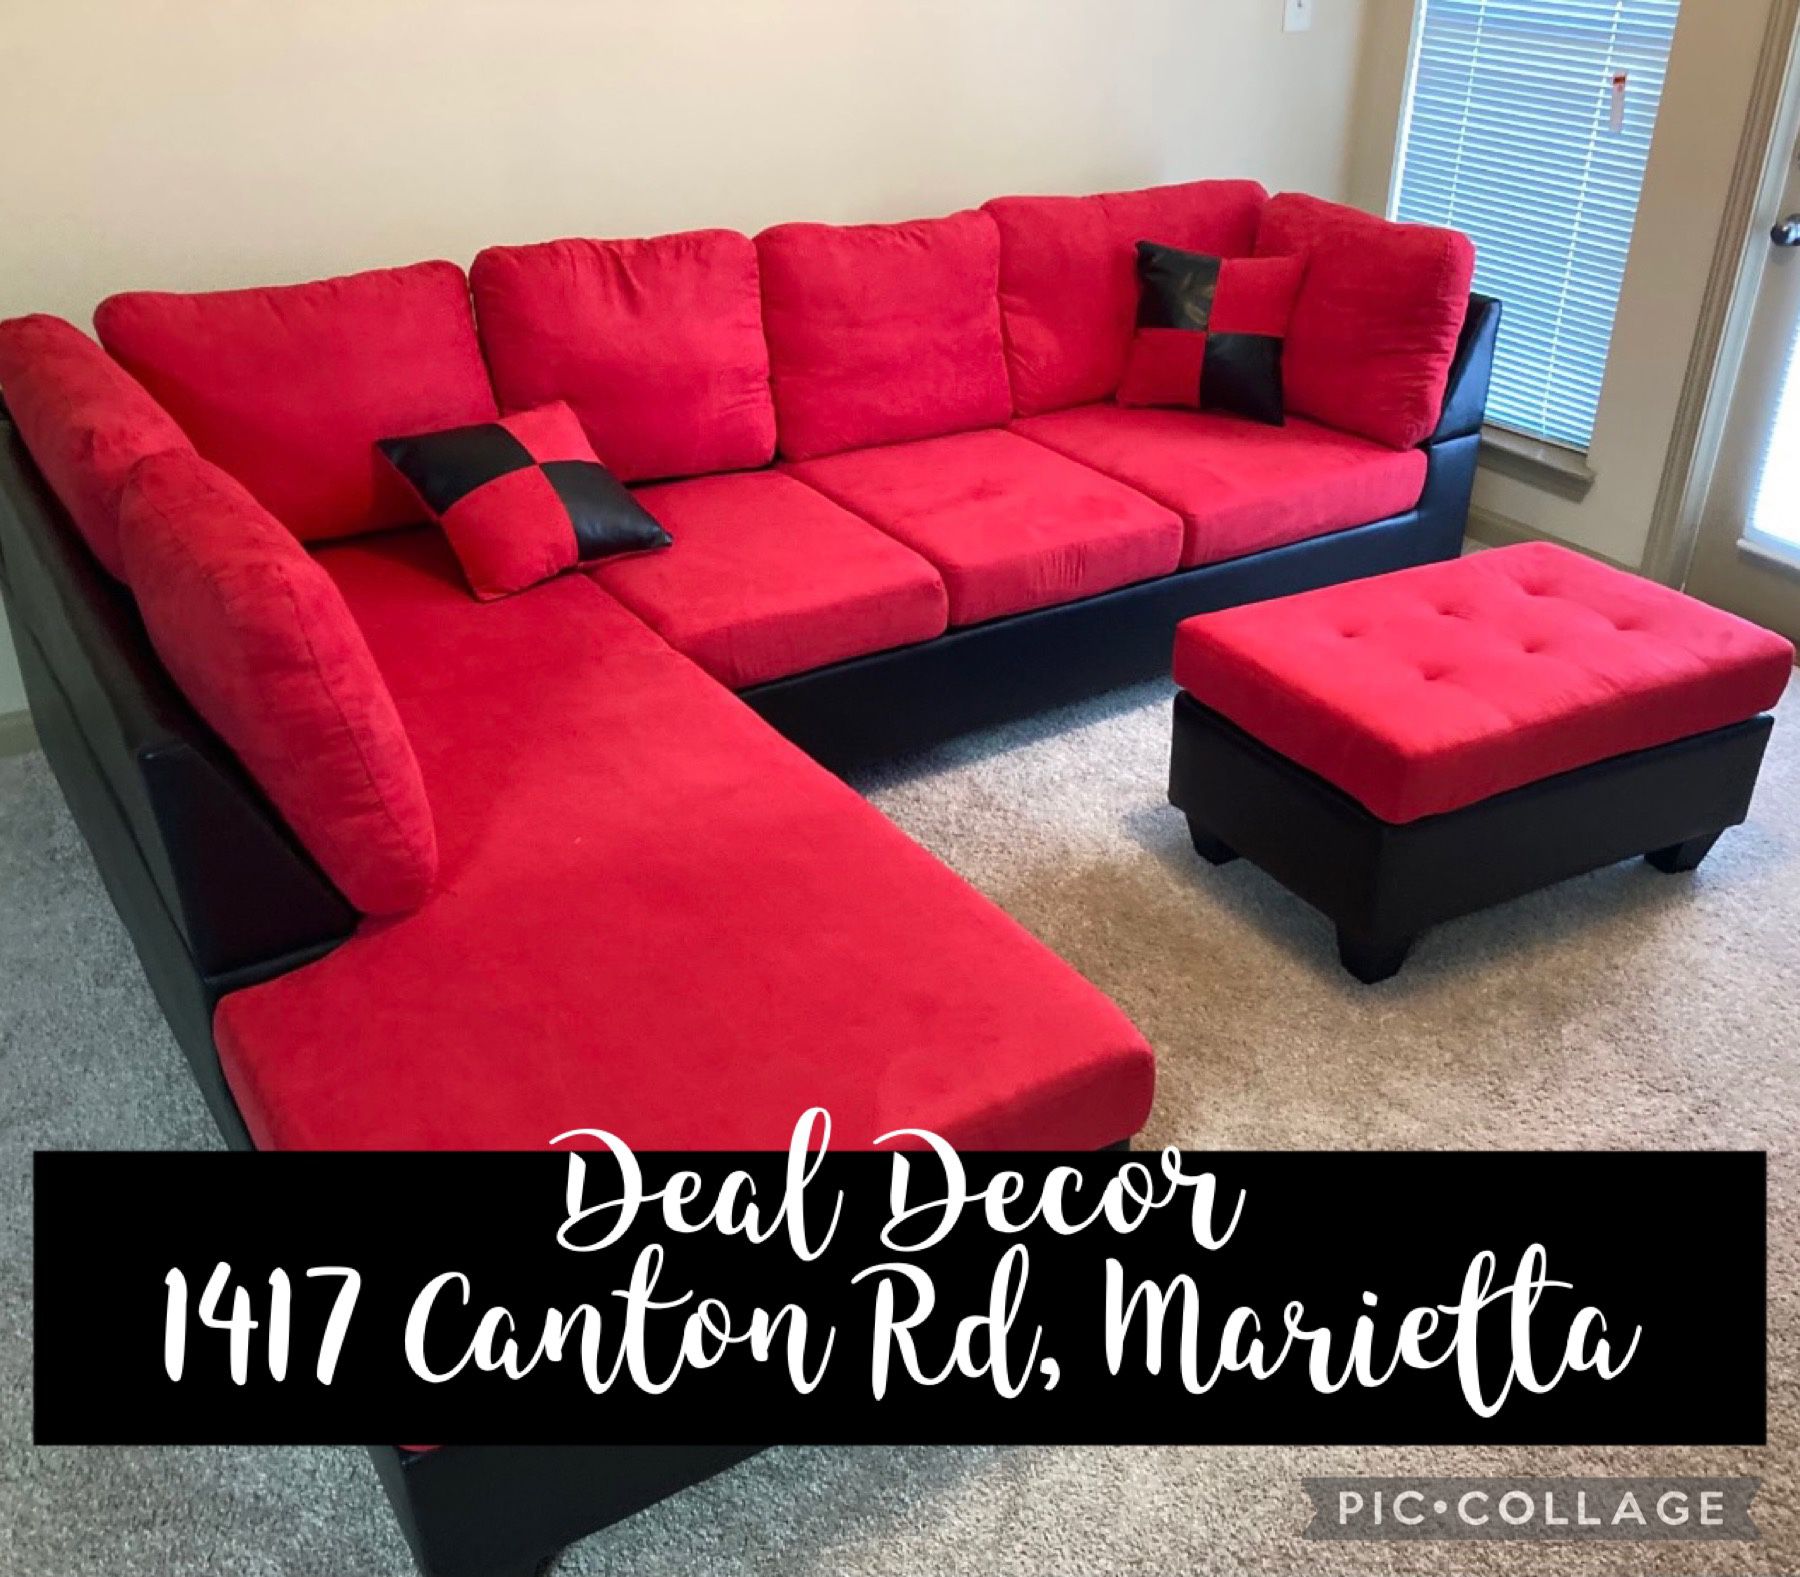 New Red And Black, L-Shaped, Sectional Sofa, Ottoman Extra